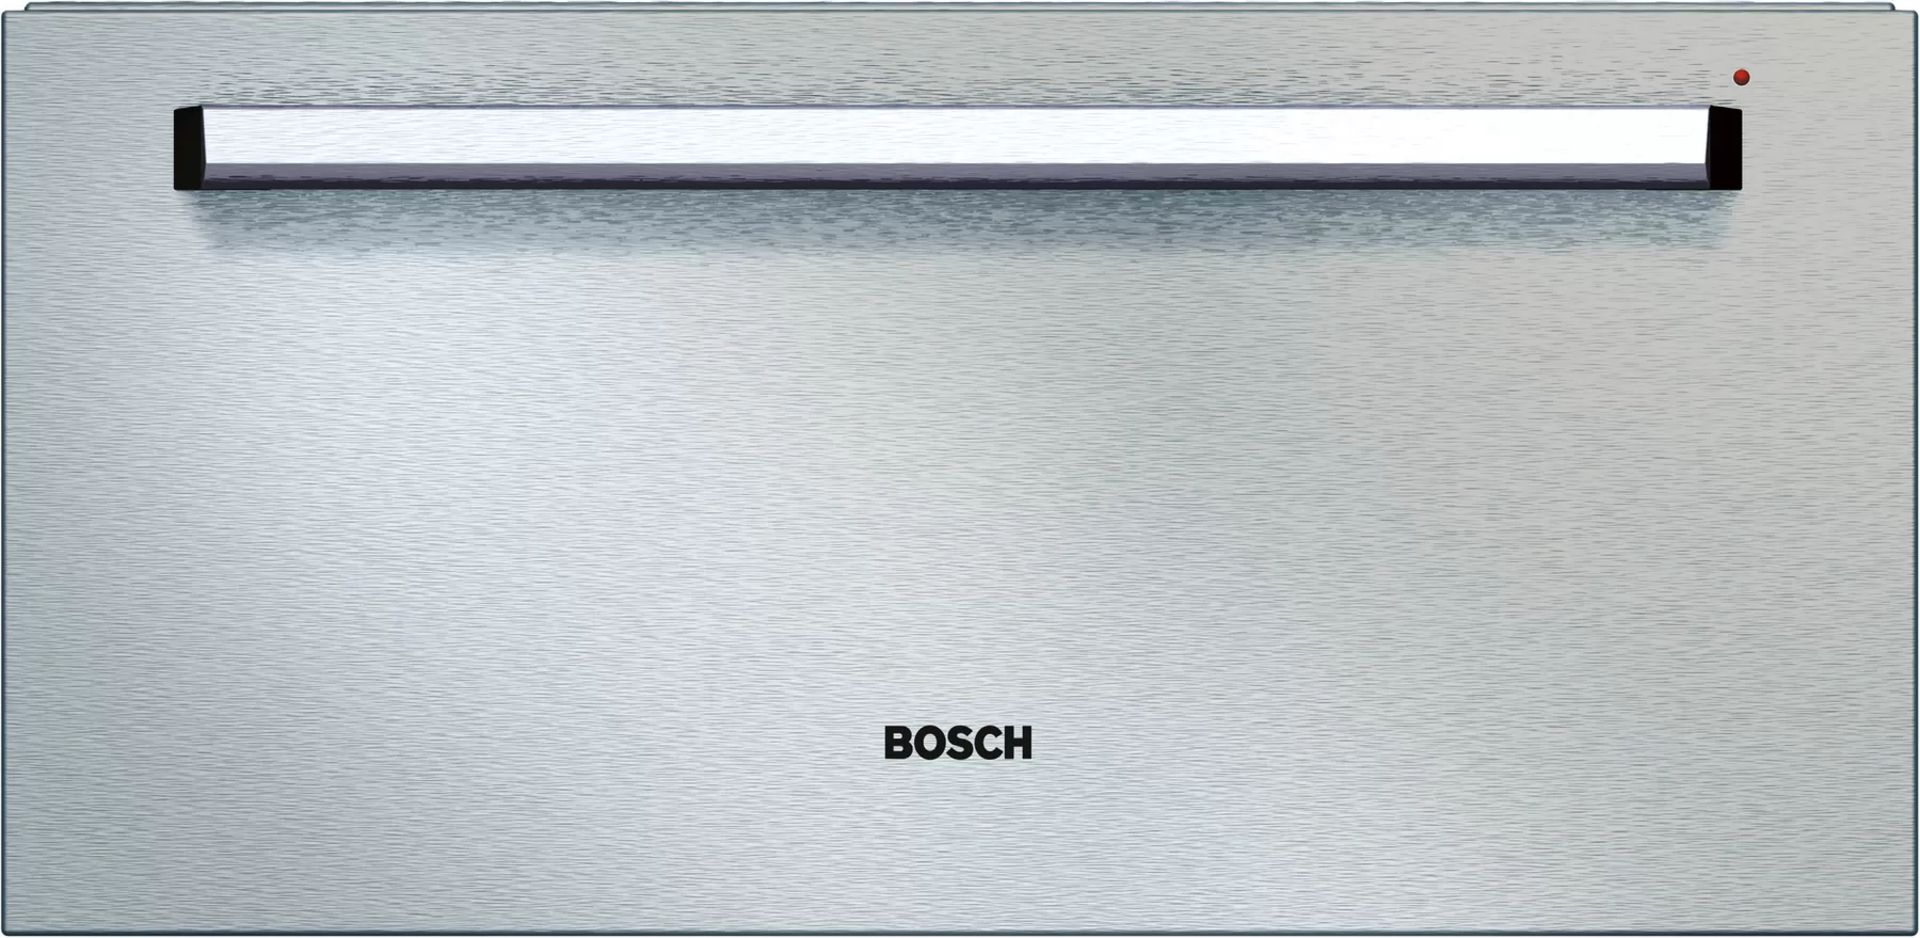 Ex-Display Brand New Boxed Bosch HSC290650B Built-in warming drawer Stainless steel RRP £999